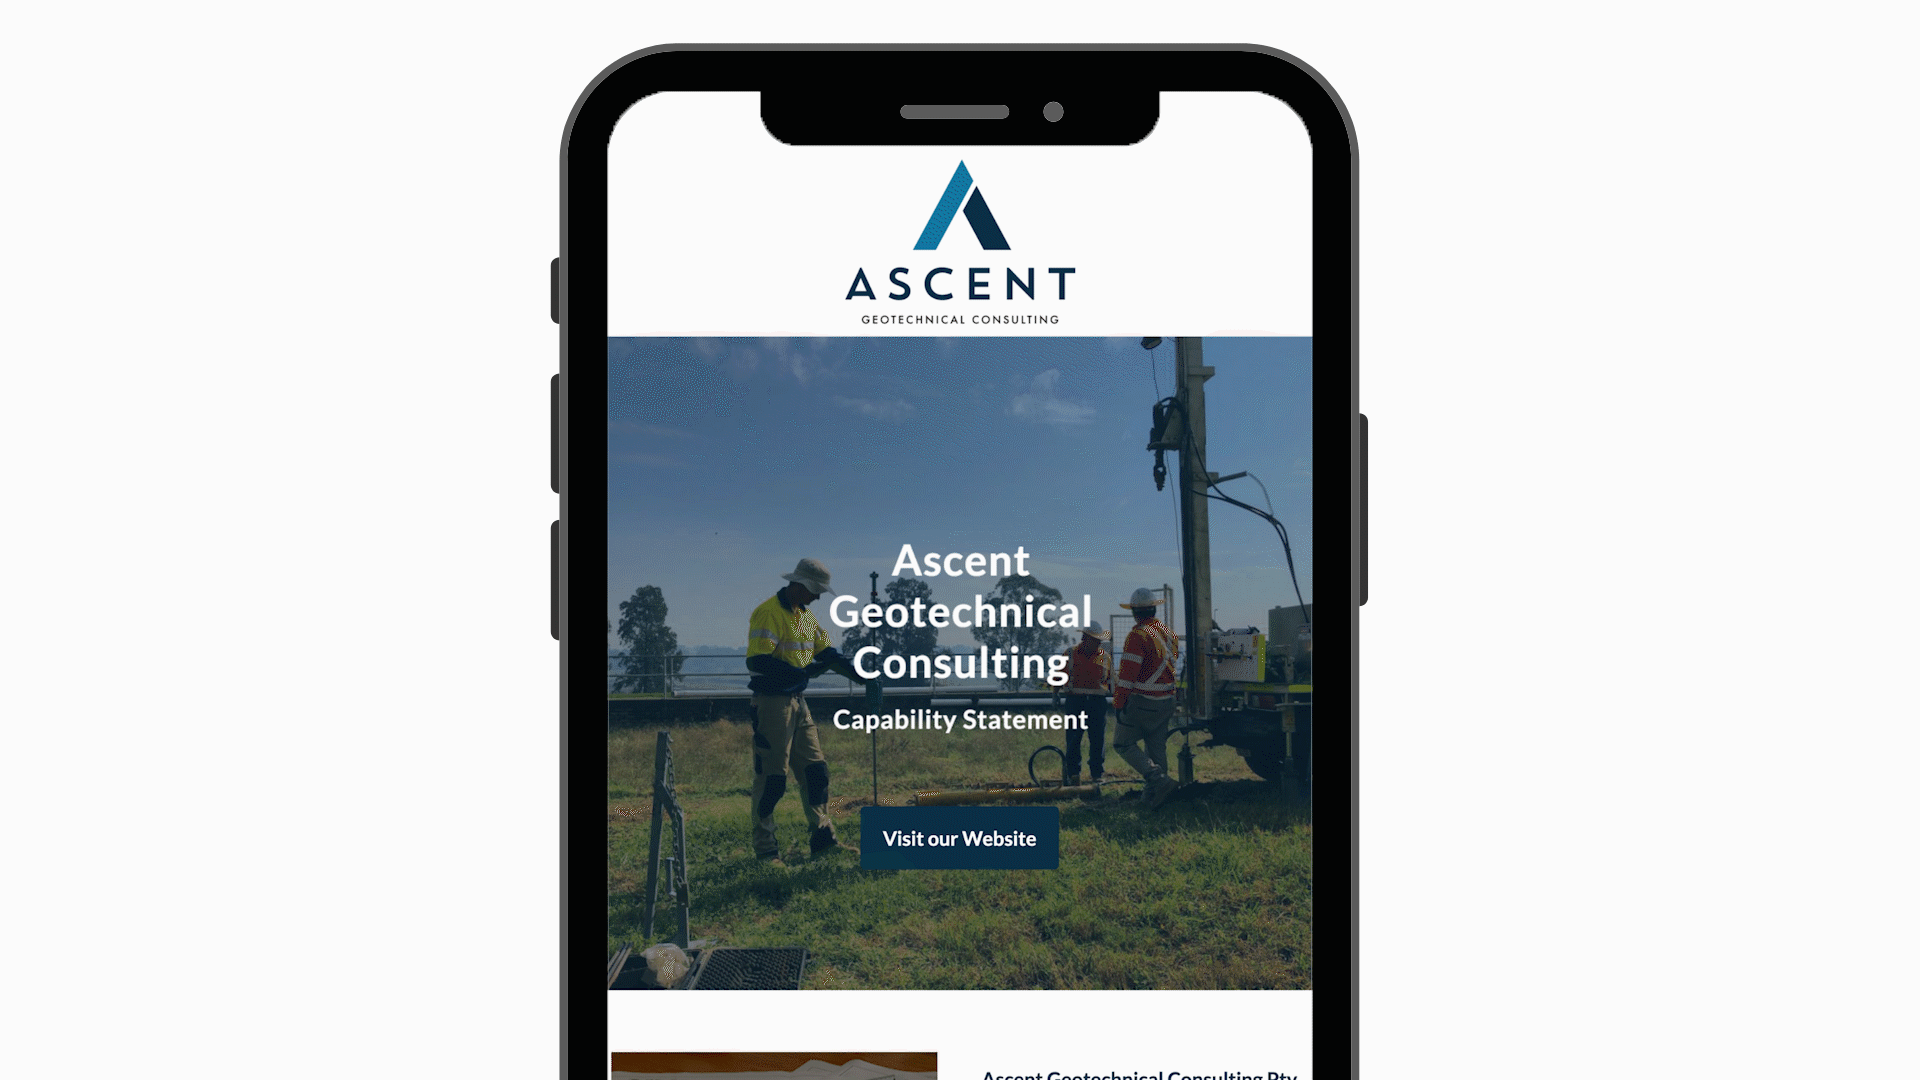 Ascent Geotechnical Consulting